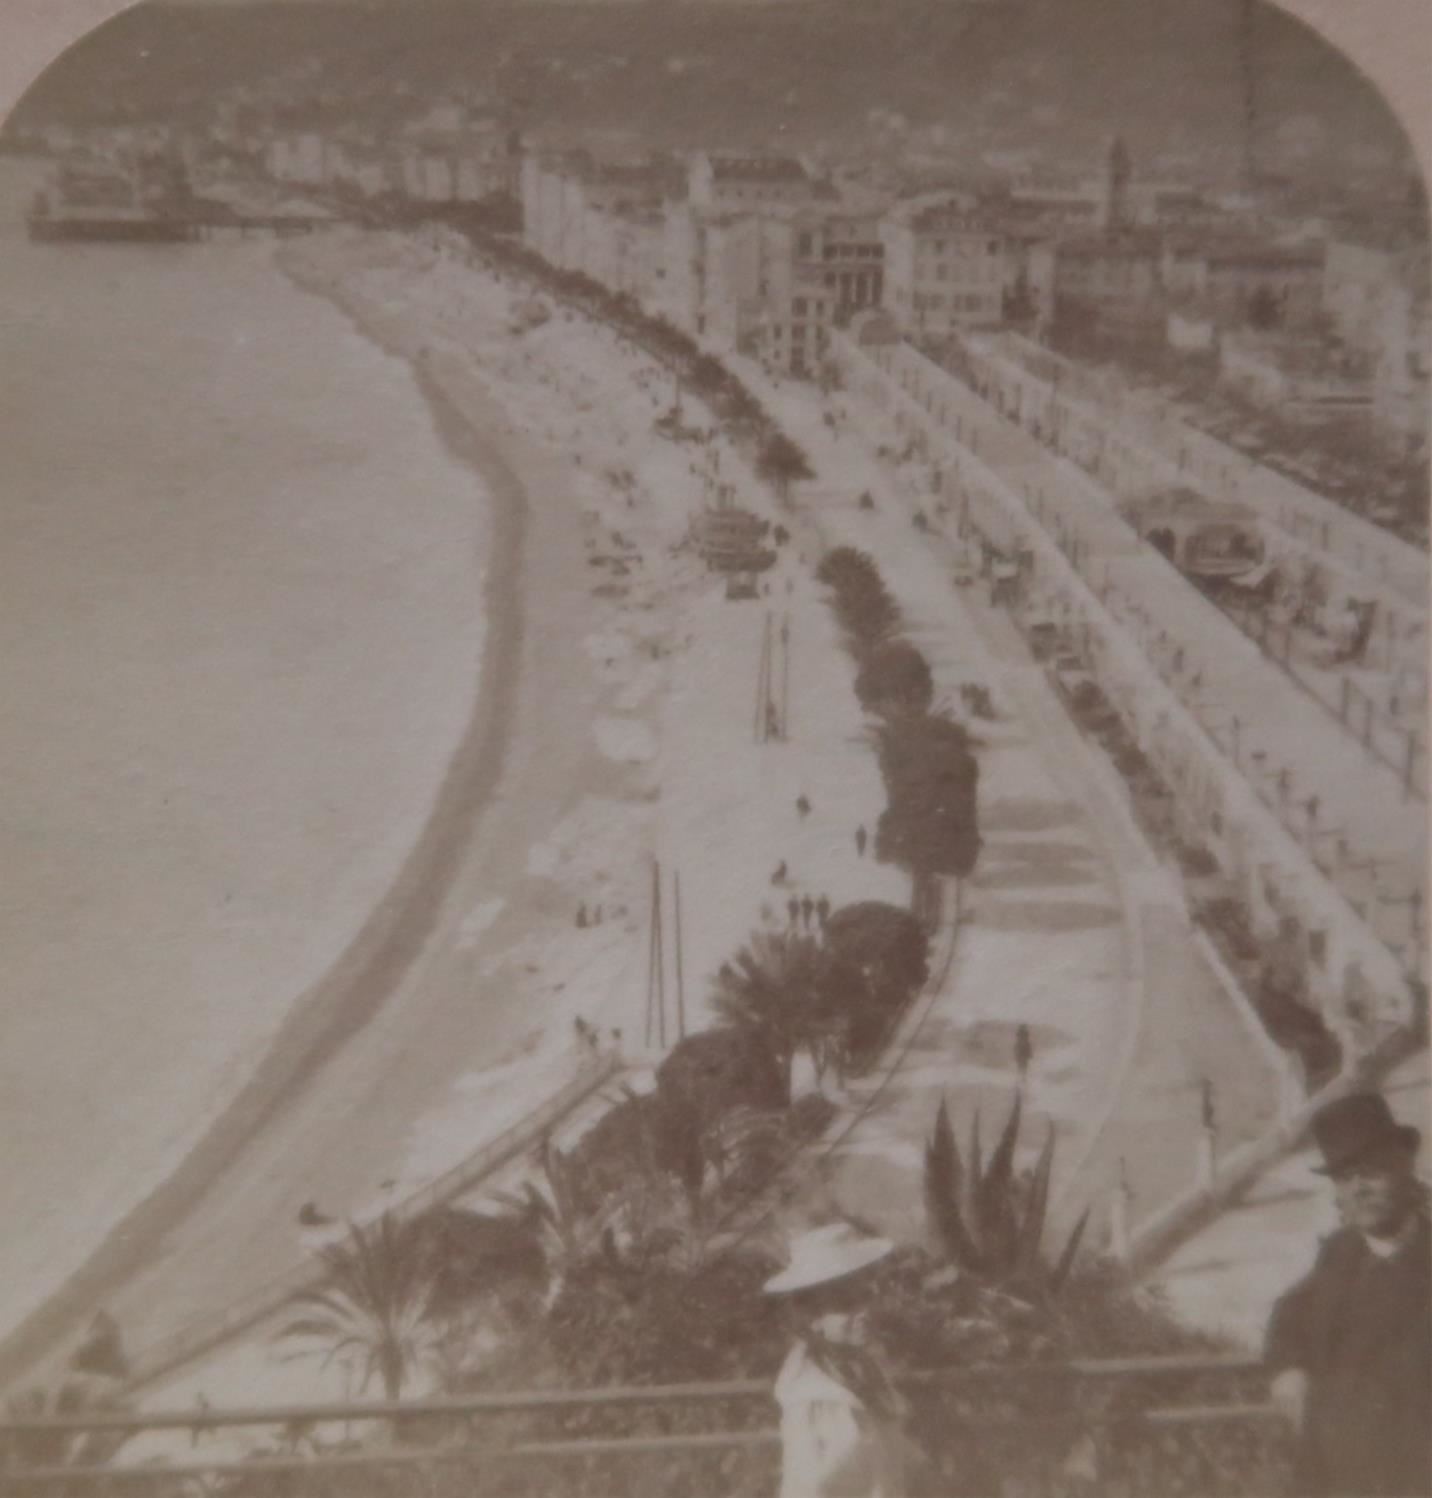 1898 NICE SOUTH FRANCE FAVORITE WINTER RESORT OF FRANCE BEACH STEREOVIEW 33-66